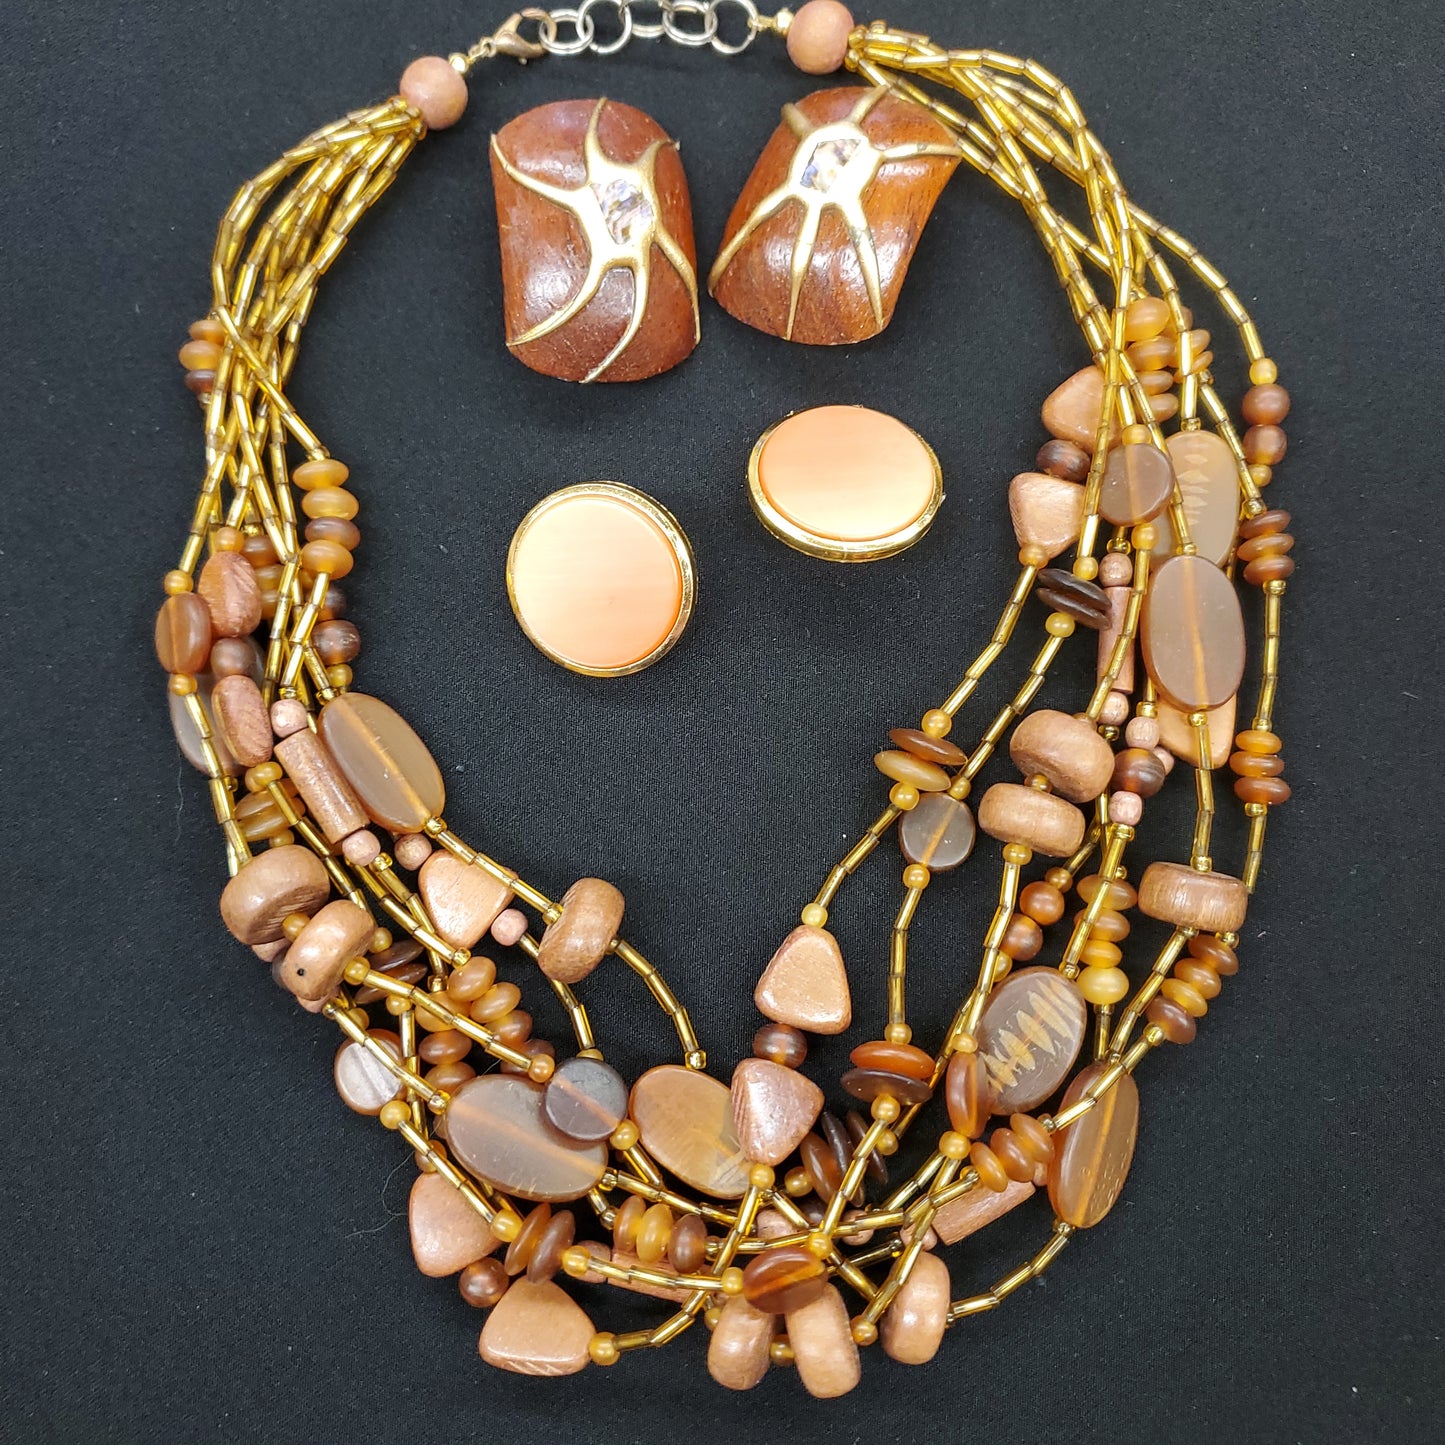 Jewelry in Sets of 3